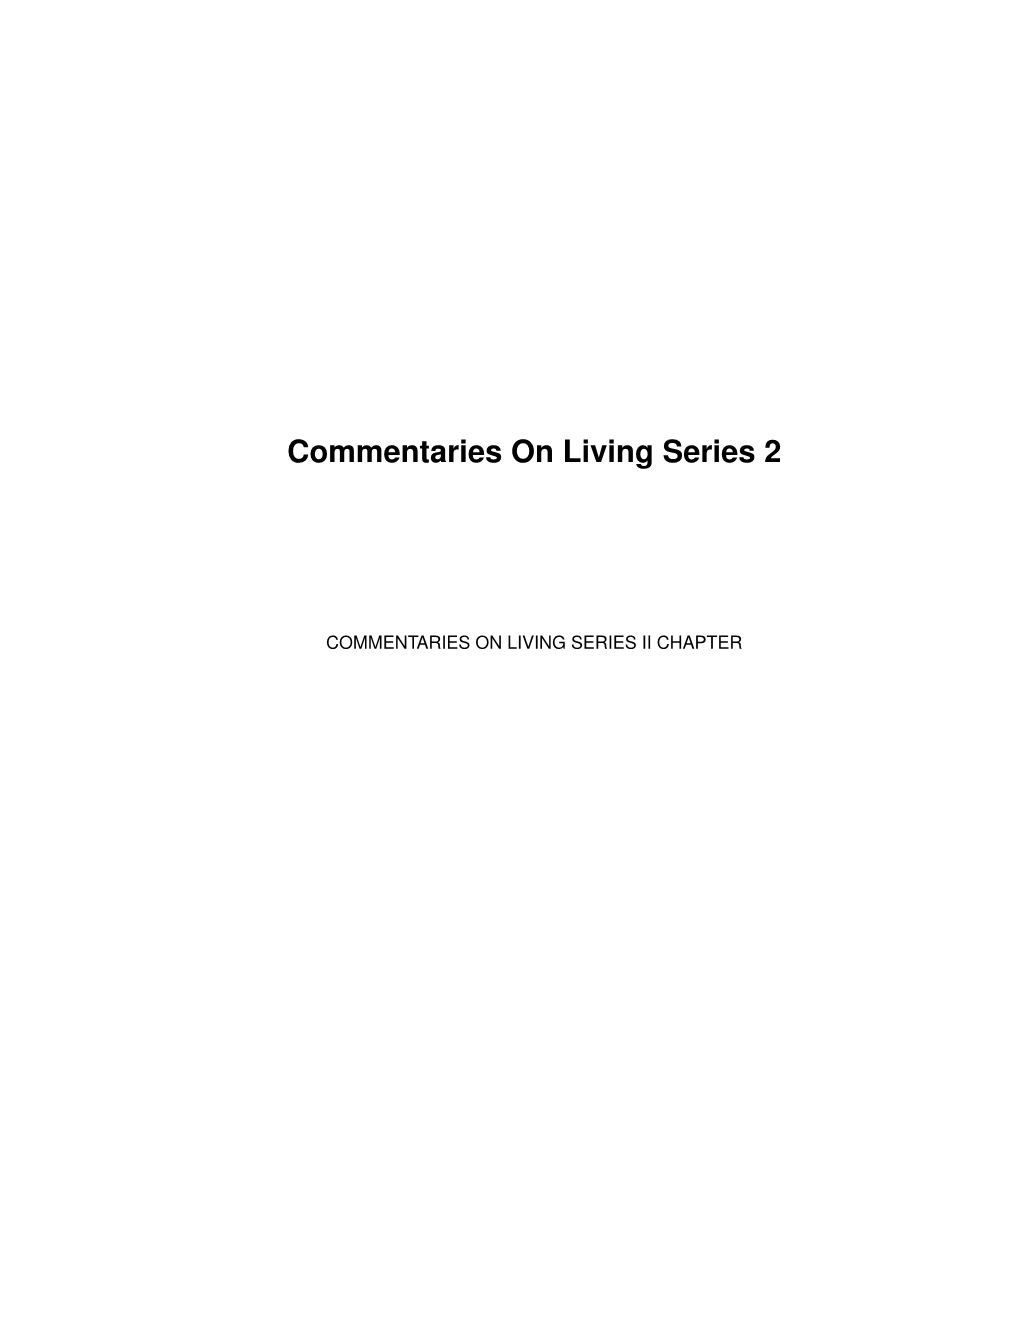 Commentaries on Living Series 2